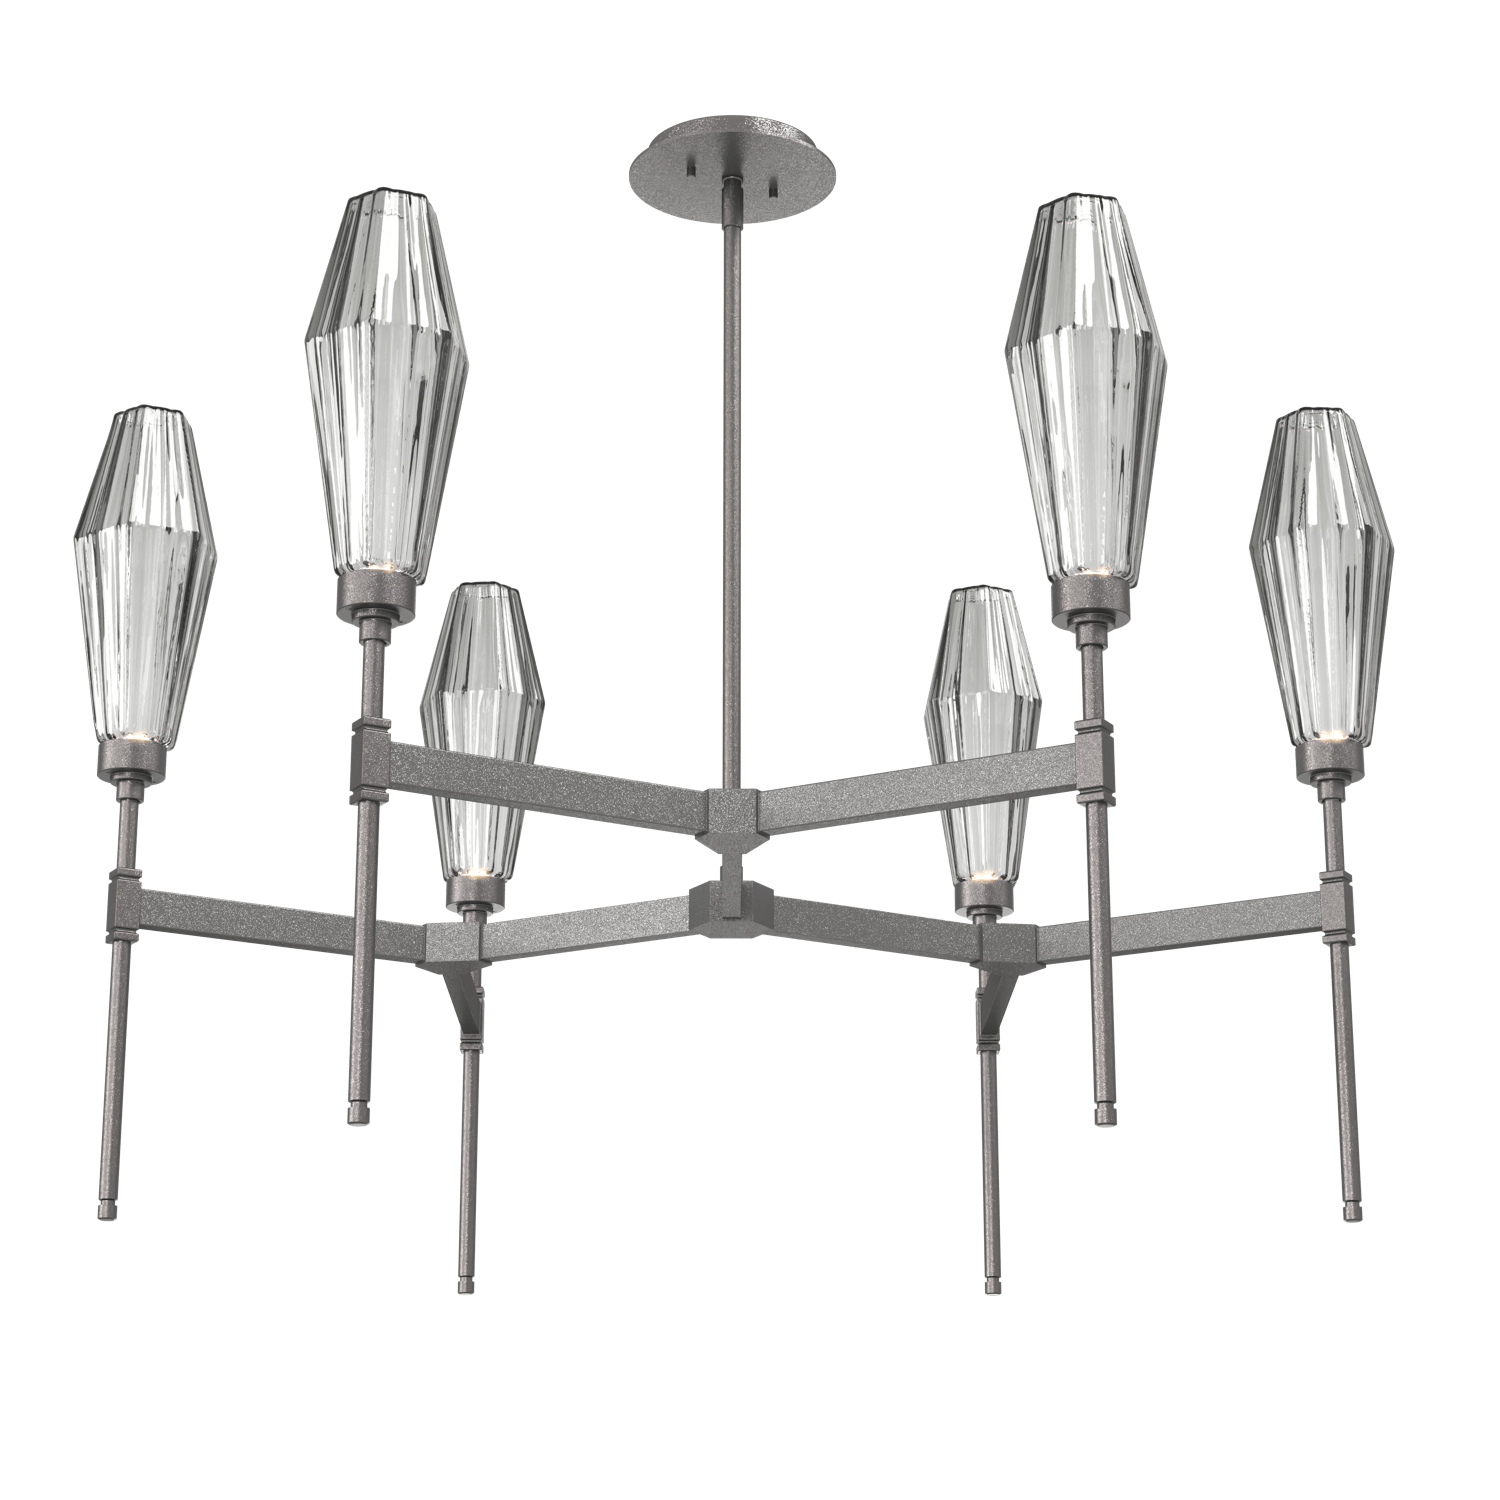 CHB0049-37-GP-RS-Hammerton-Studio-Aalto-37-inch-round-belvedere-chandelier-with-graphite-finish-and-optic-ribbed-smoke-glass-shades-and-LED-lamping